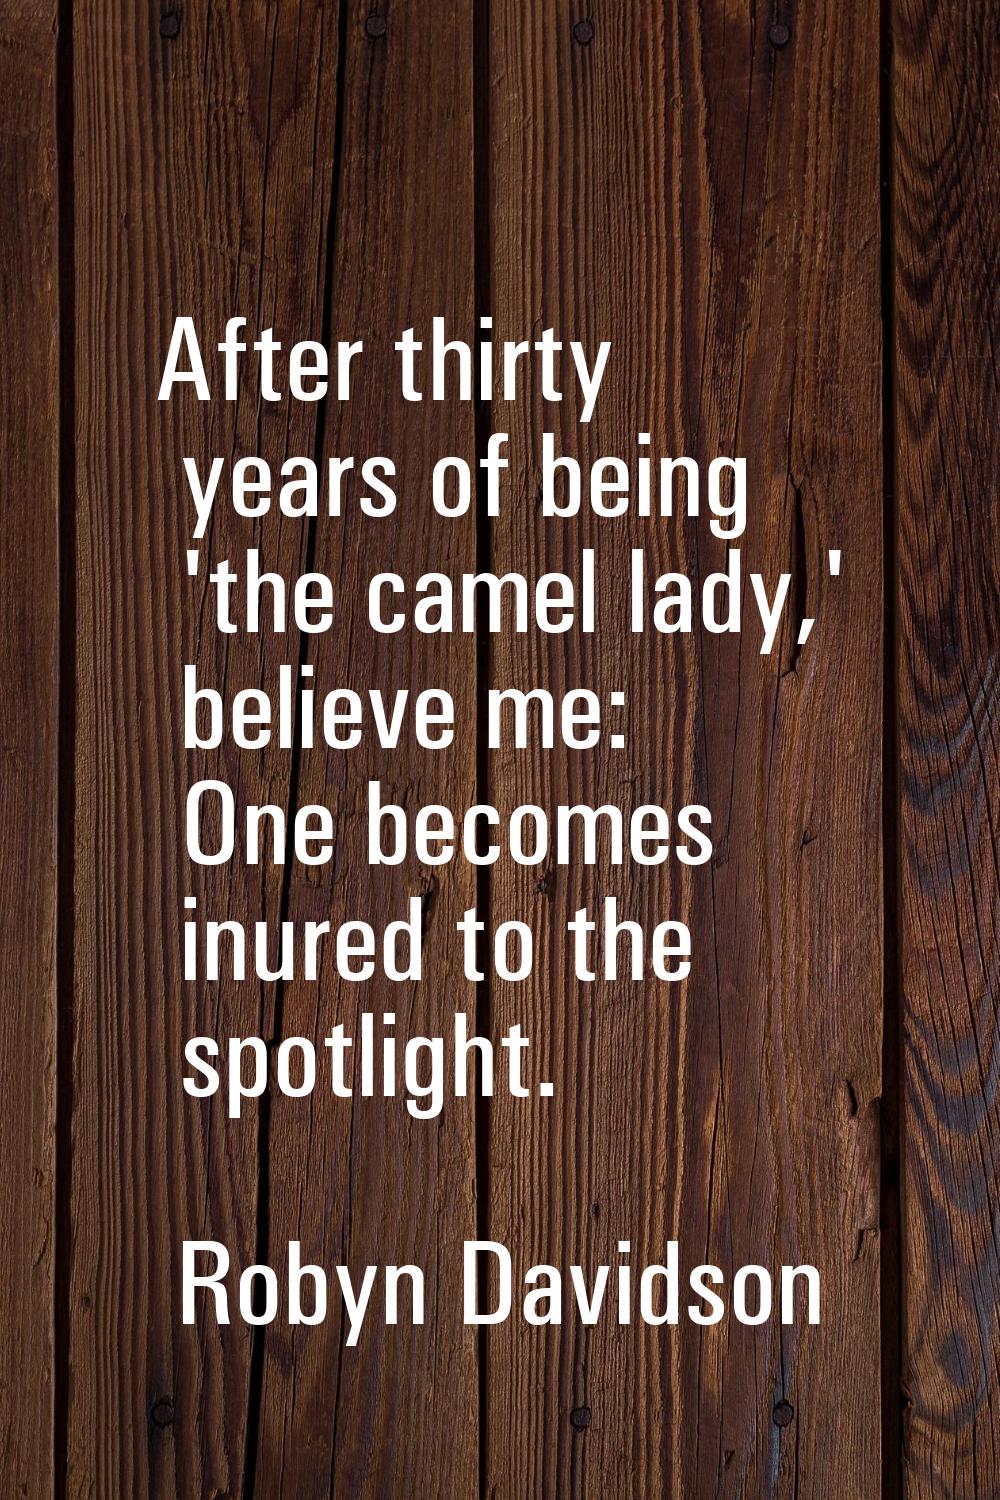 After thirty years of being 'the camel lady,' believe me: One becomes inured to the spotlight.